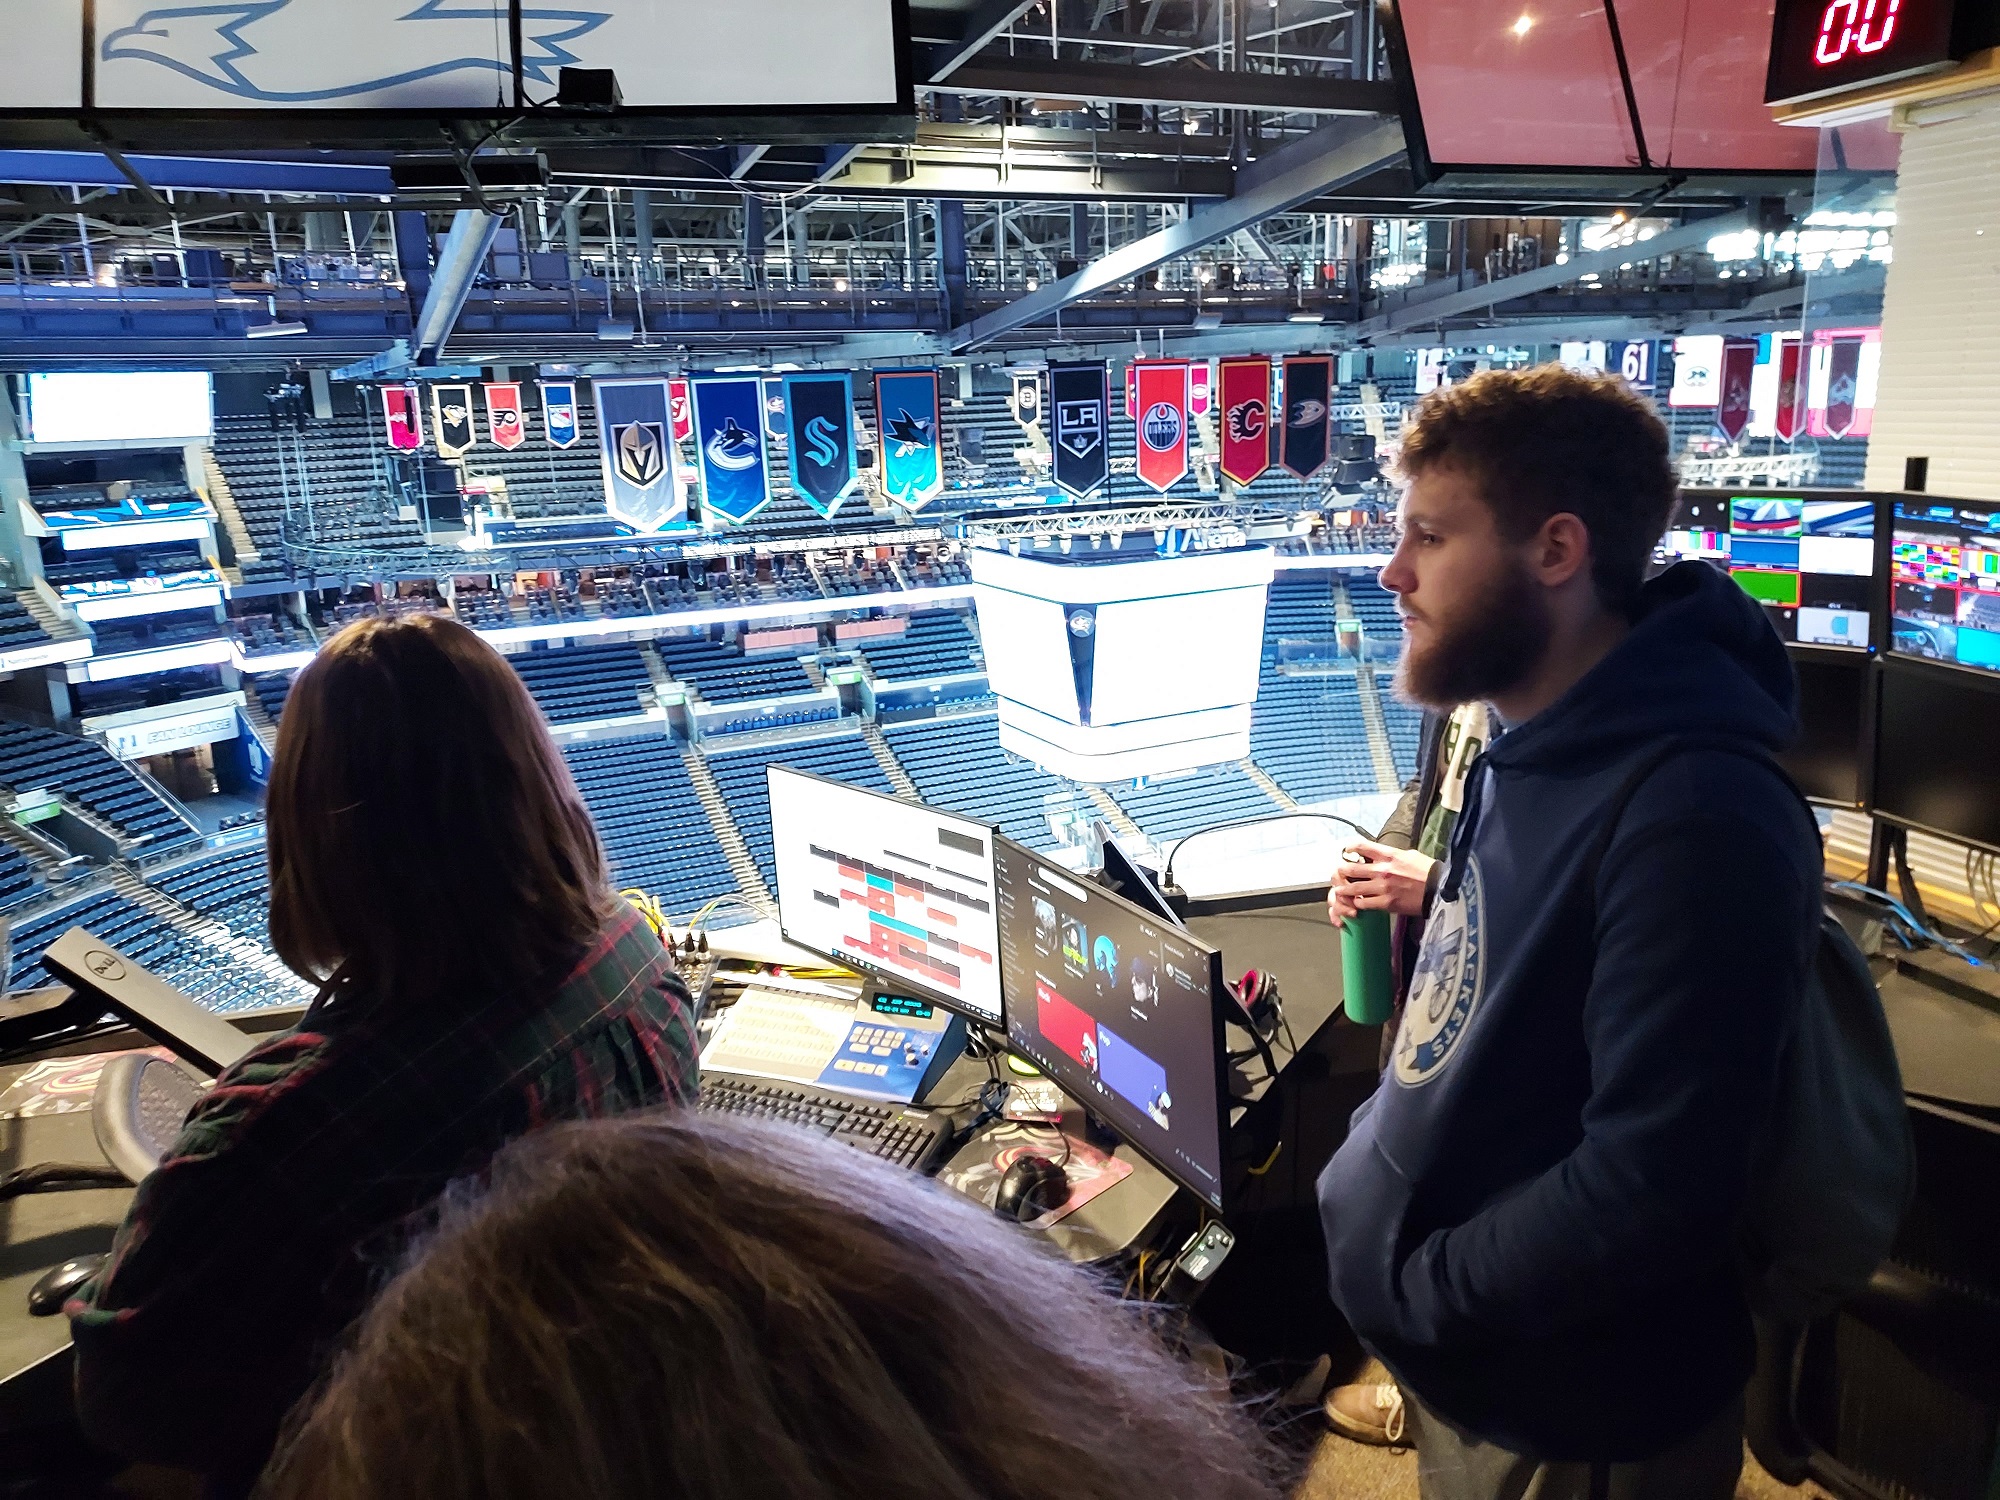 OHIO students are shown in the production booth for the Columbus Blue Jackets